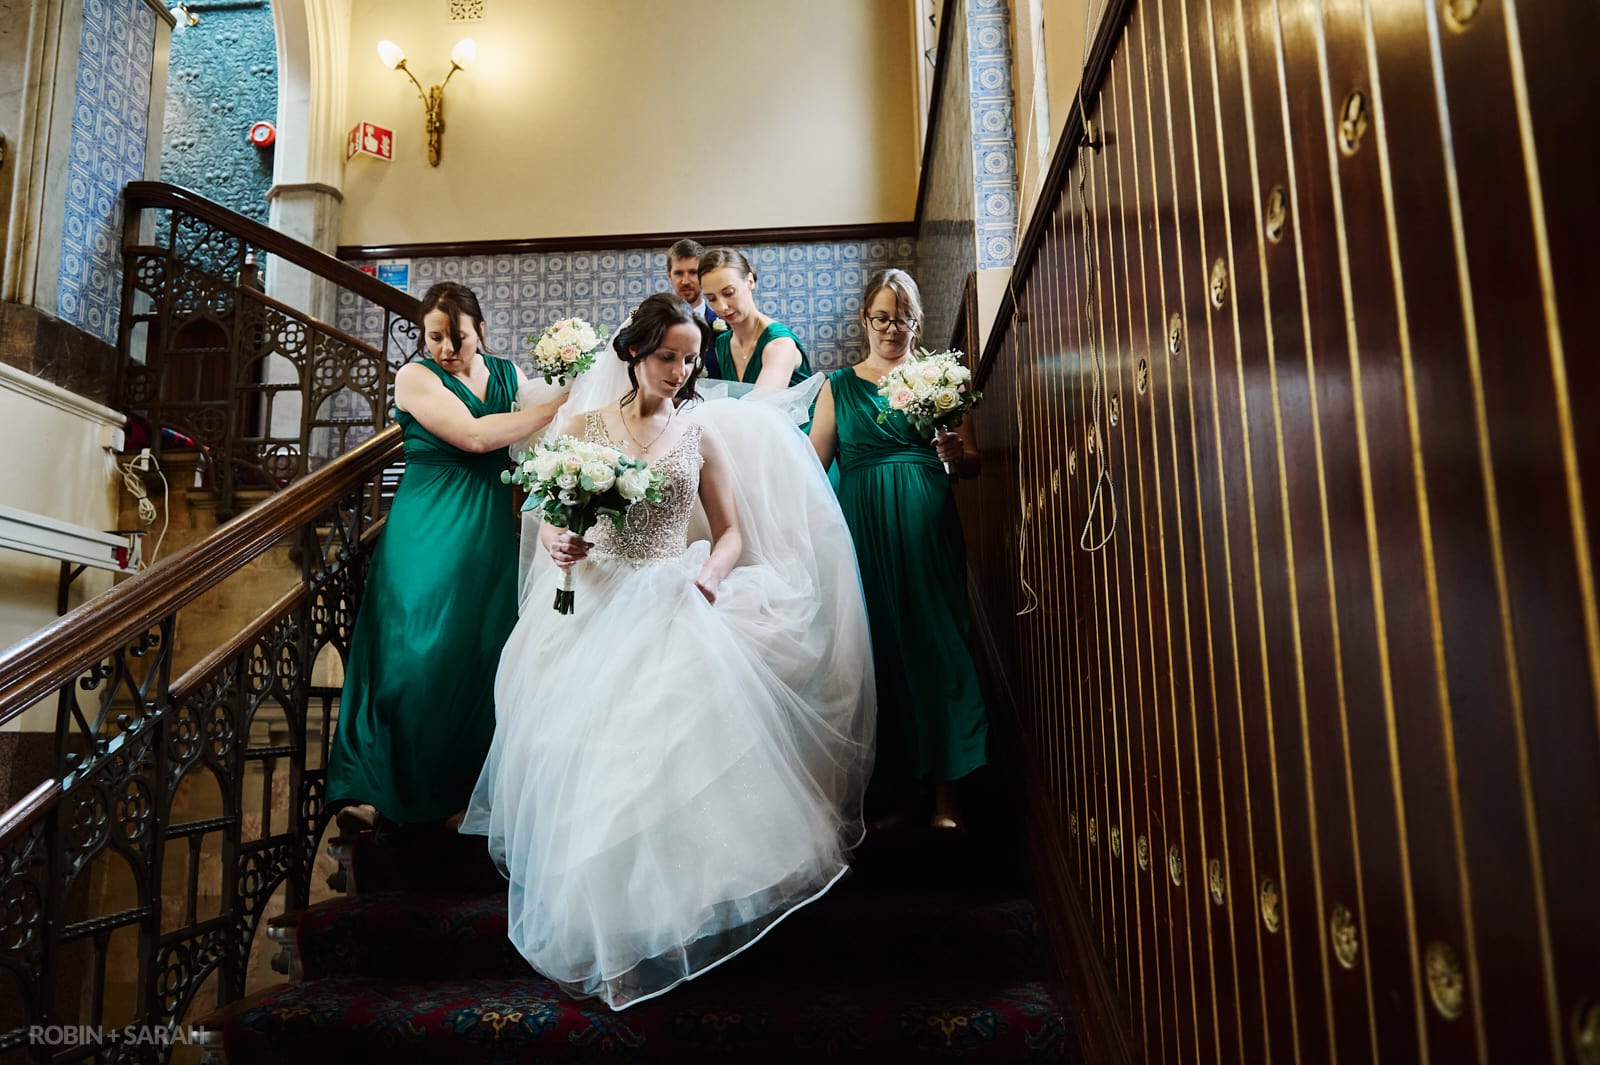 Bride and bridesmaids carefully walk down staircase